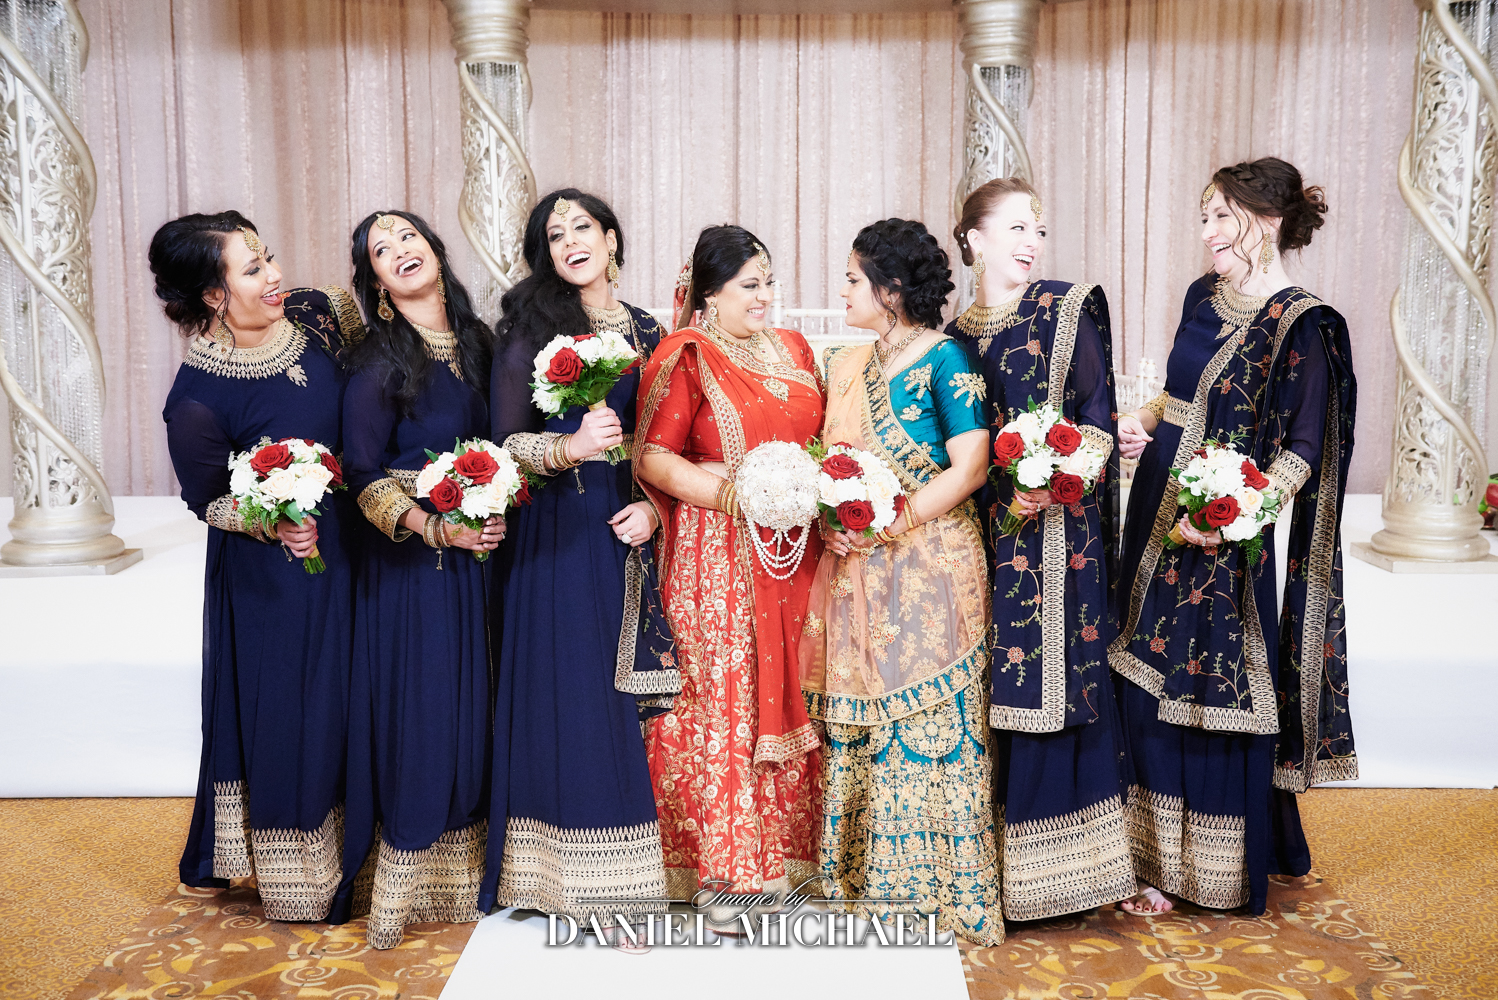 South Asian Hindu bride with celebrants